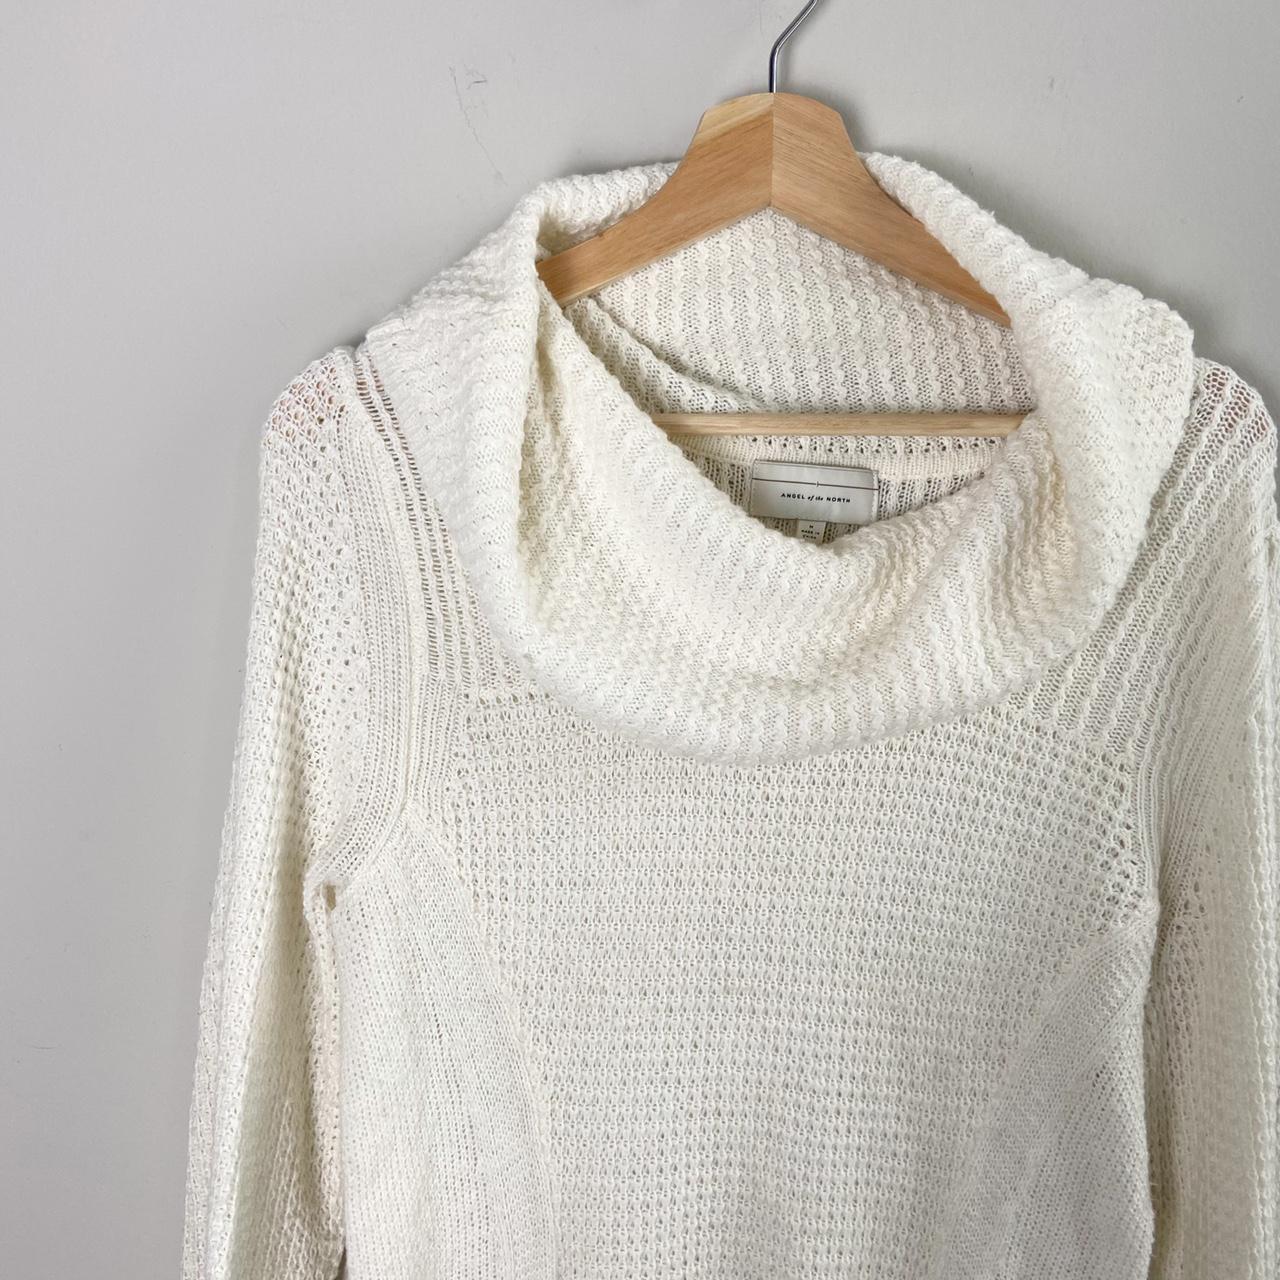 Anthropologie Angel of The North Ivory Cowl Neck... - Depop